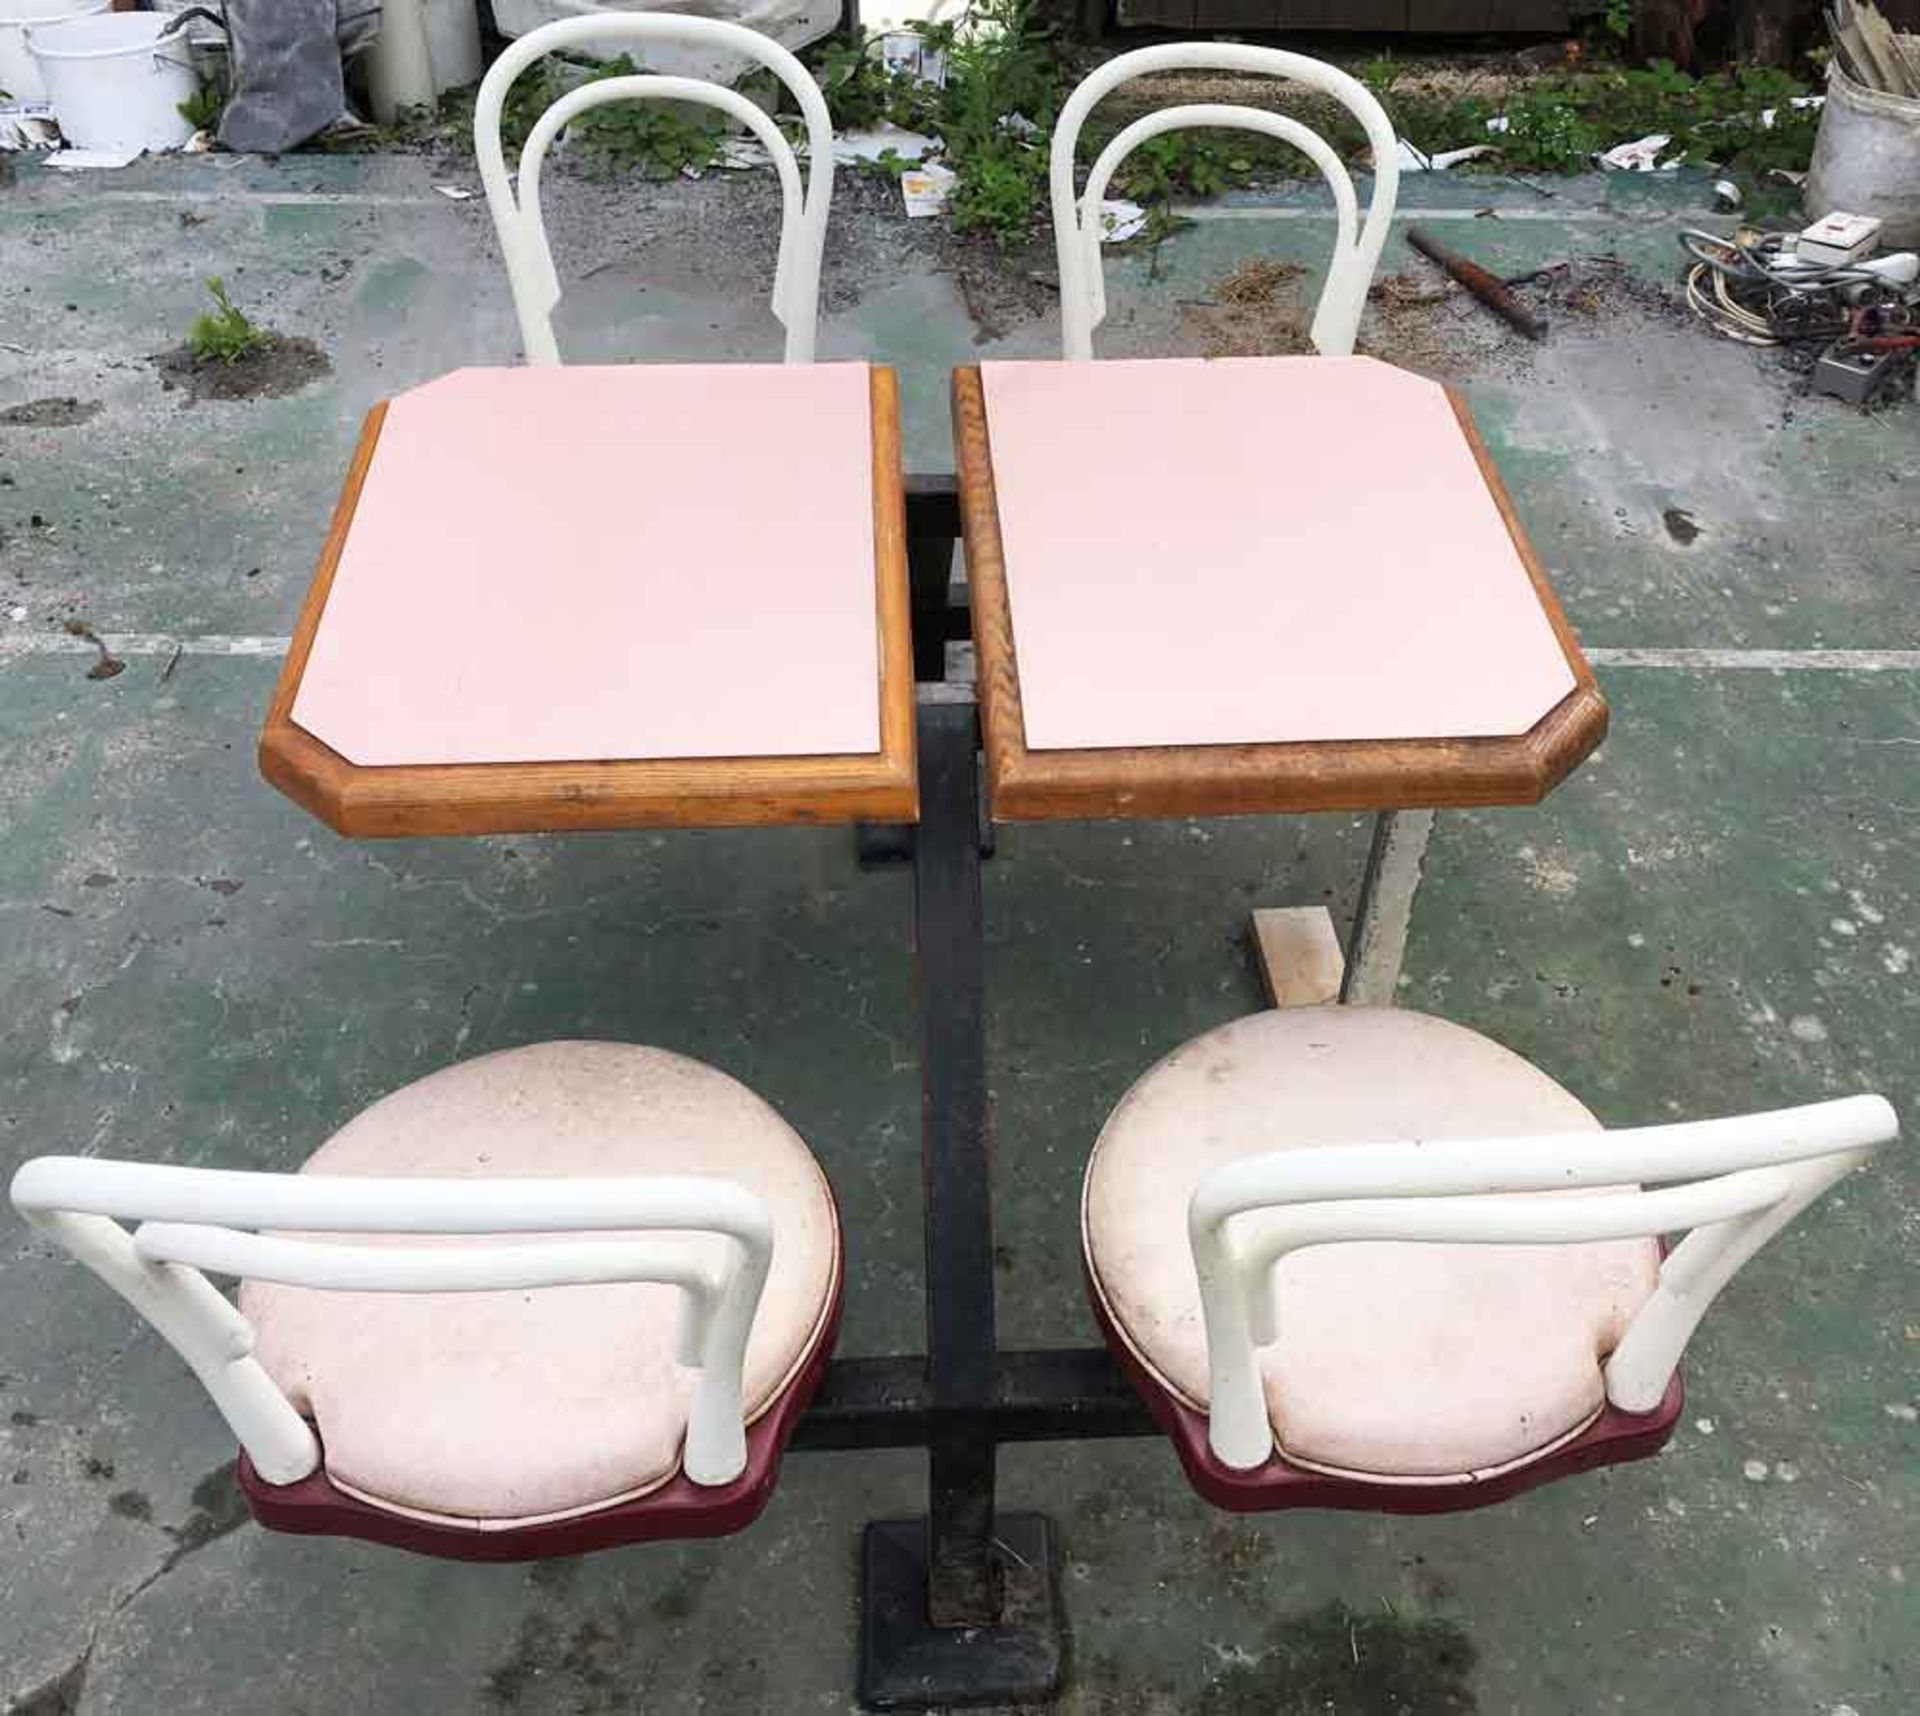 2 x 4 Position Bench Chairs – Ex MacDonalds - Image 2 of 2